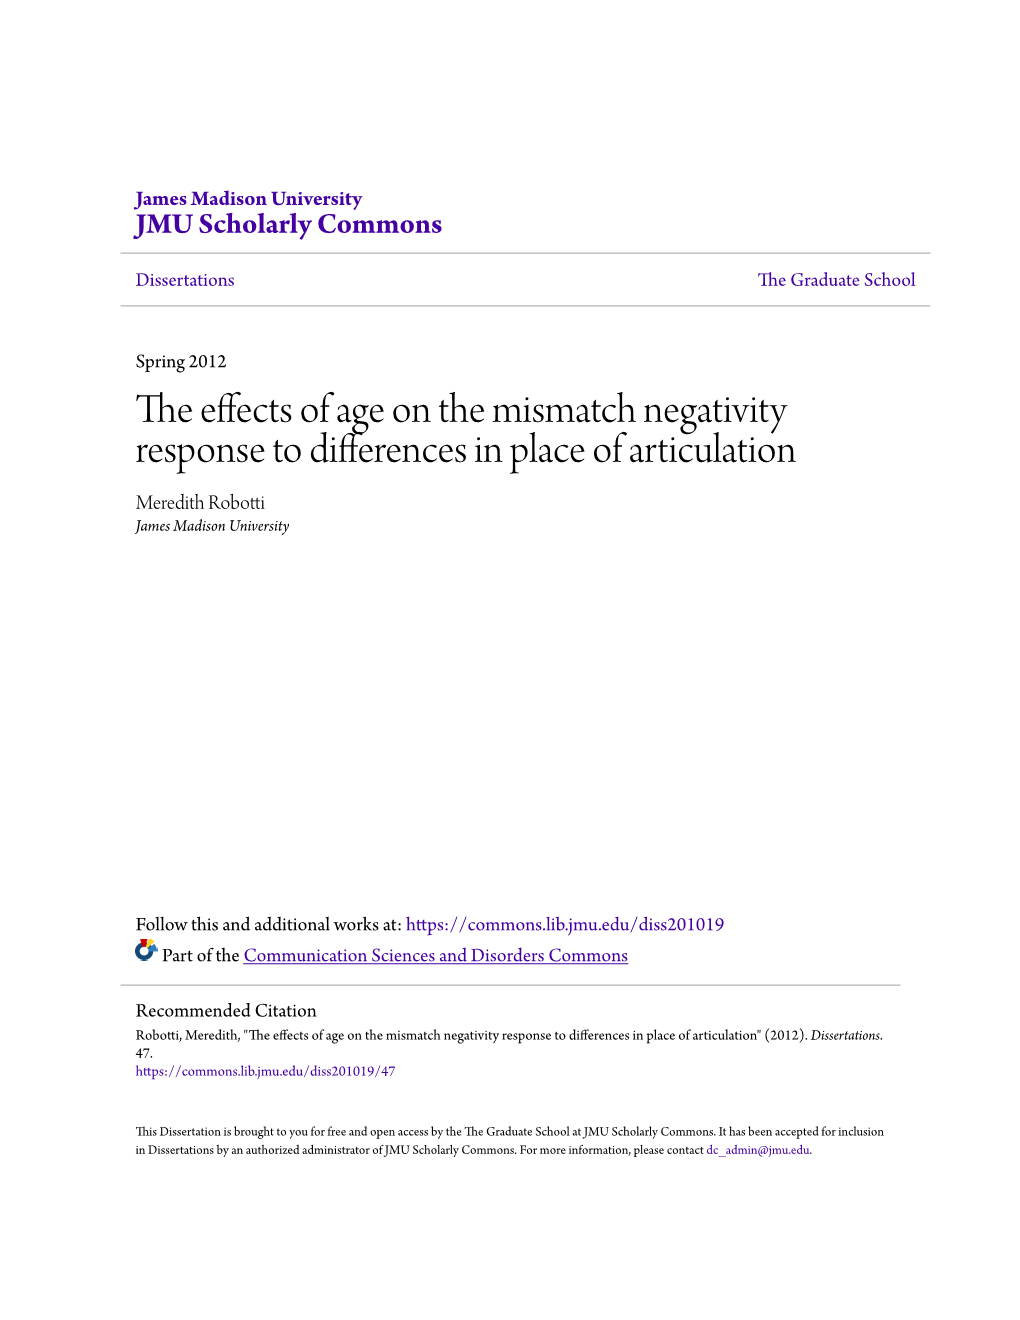 The Effects of Age on the Mismatch Negativity Response to Differences in Place of Articulation Meredith Robotti James Madison University